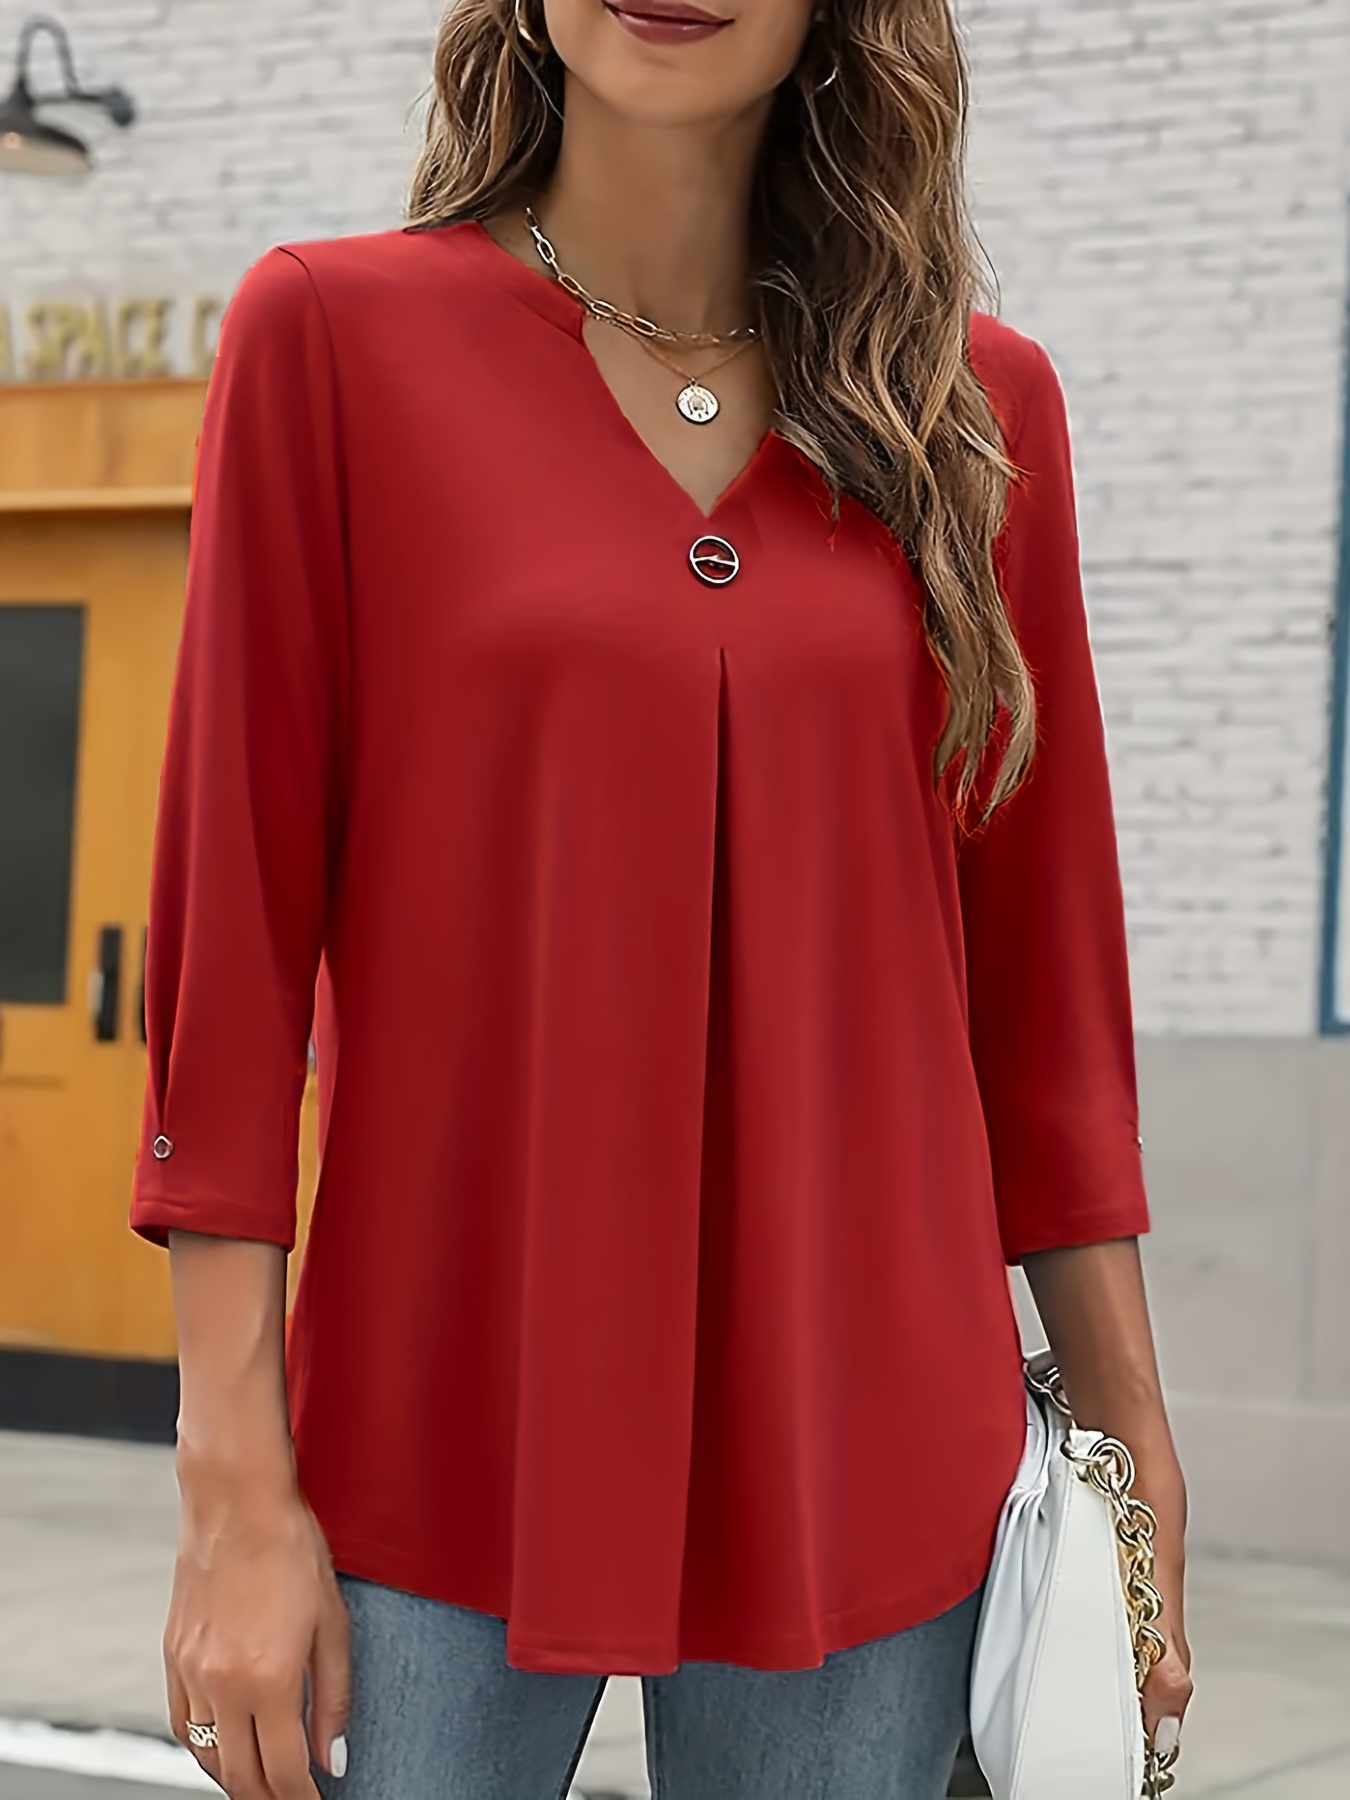 Women's Tops Fashion V neck Long Sleeve Solid Casual Pleated